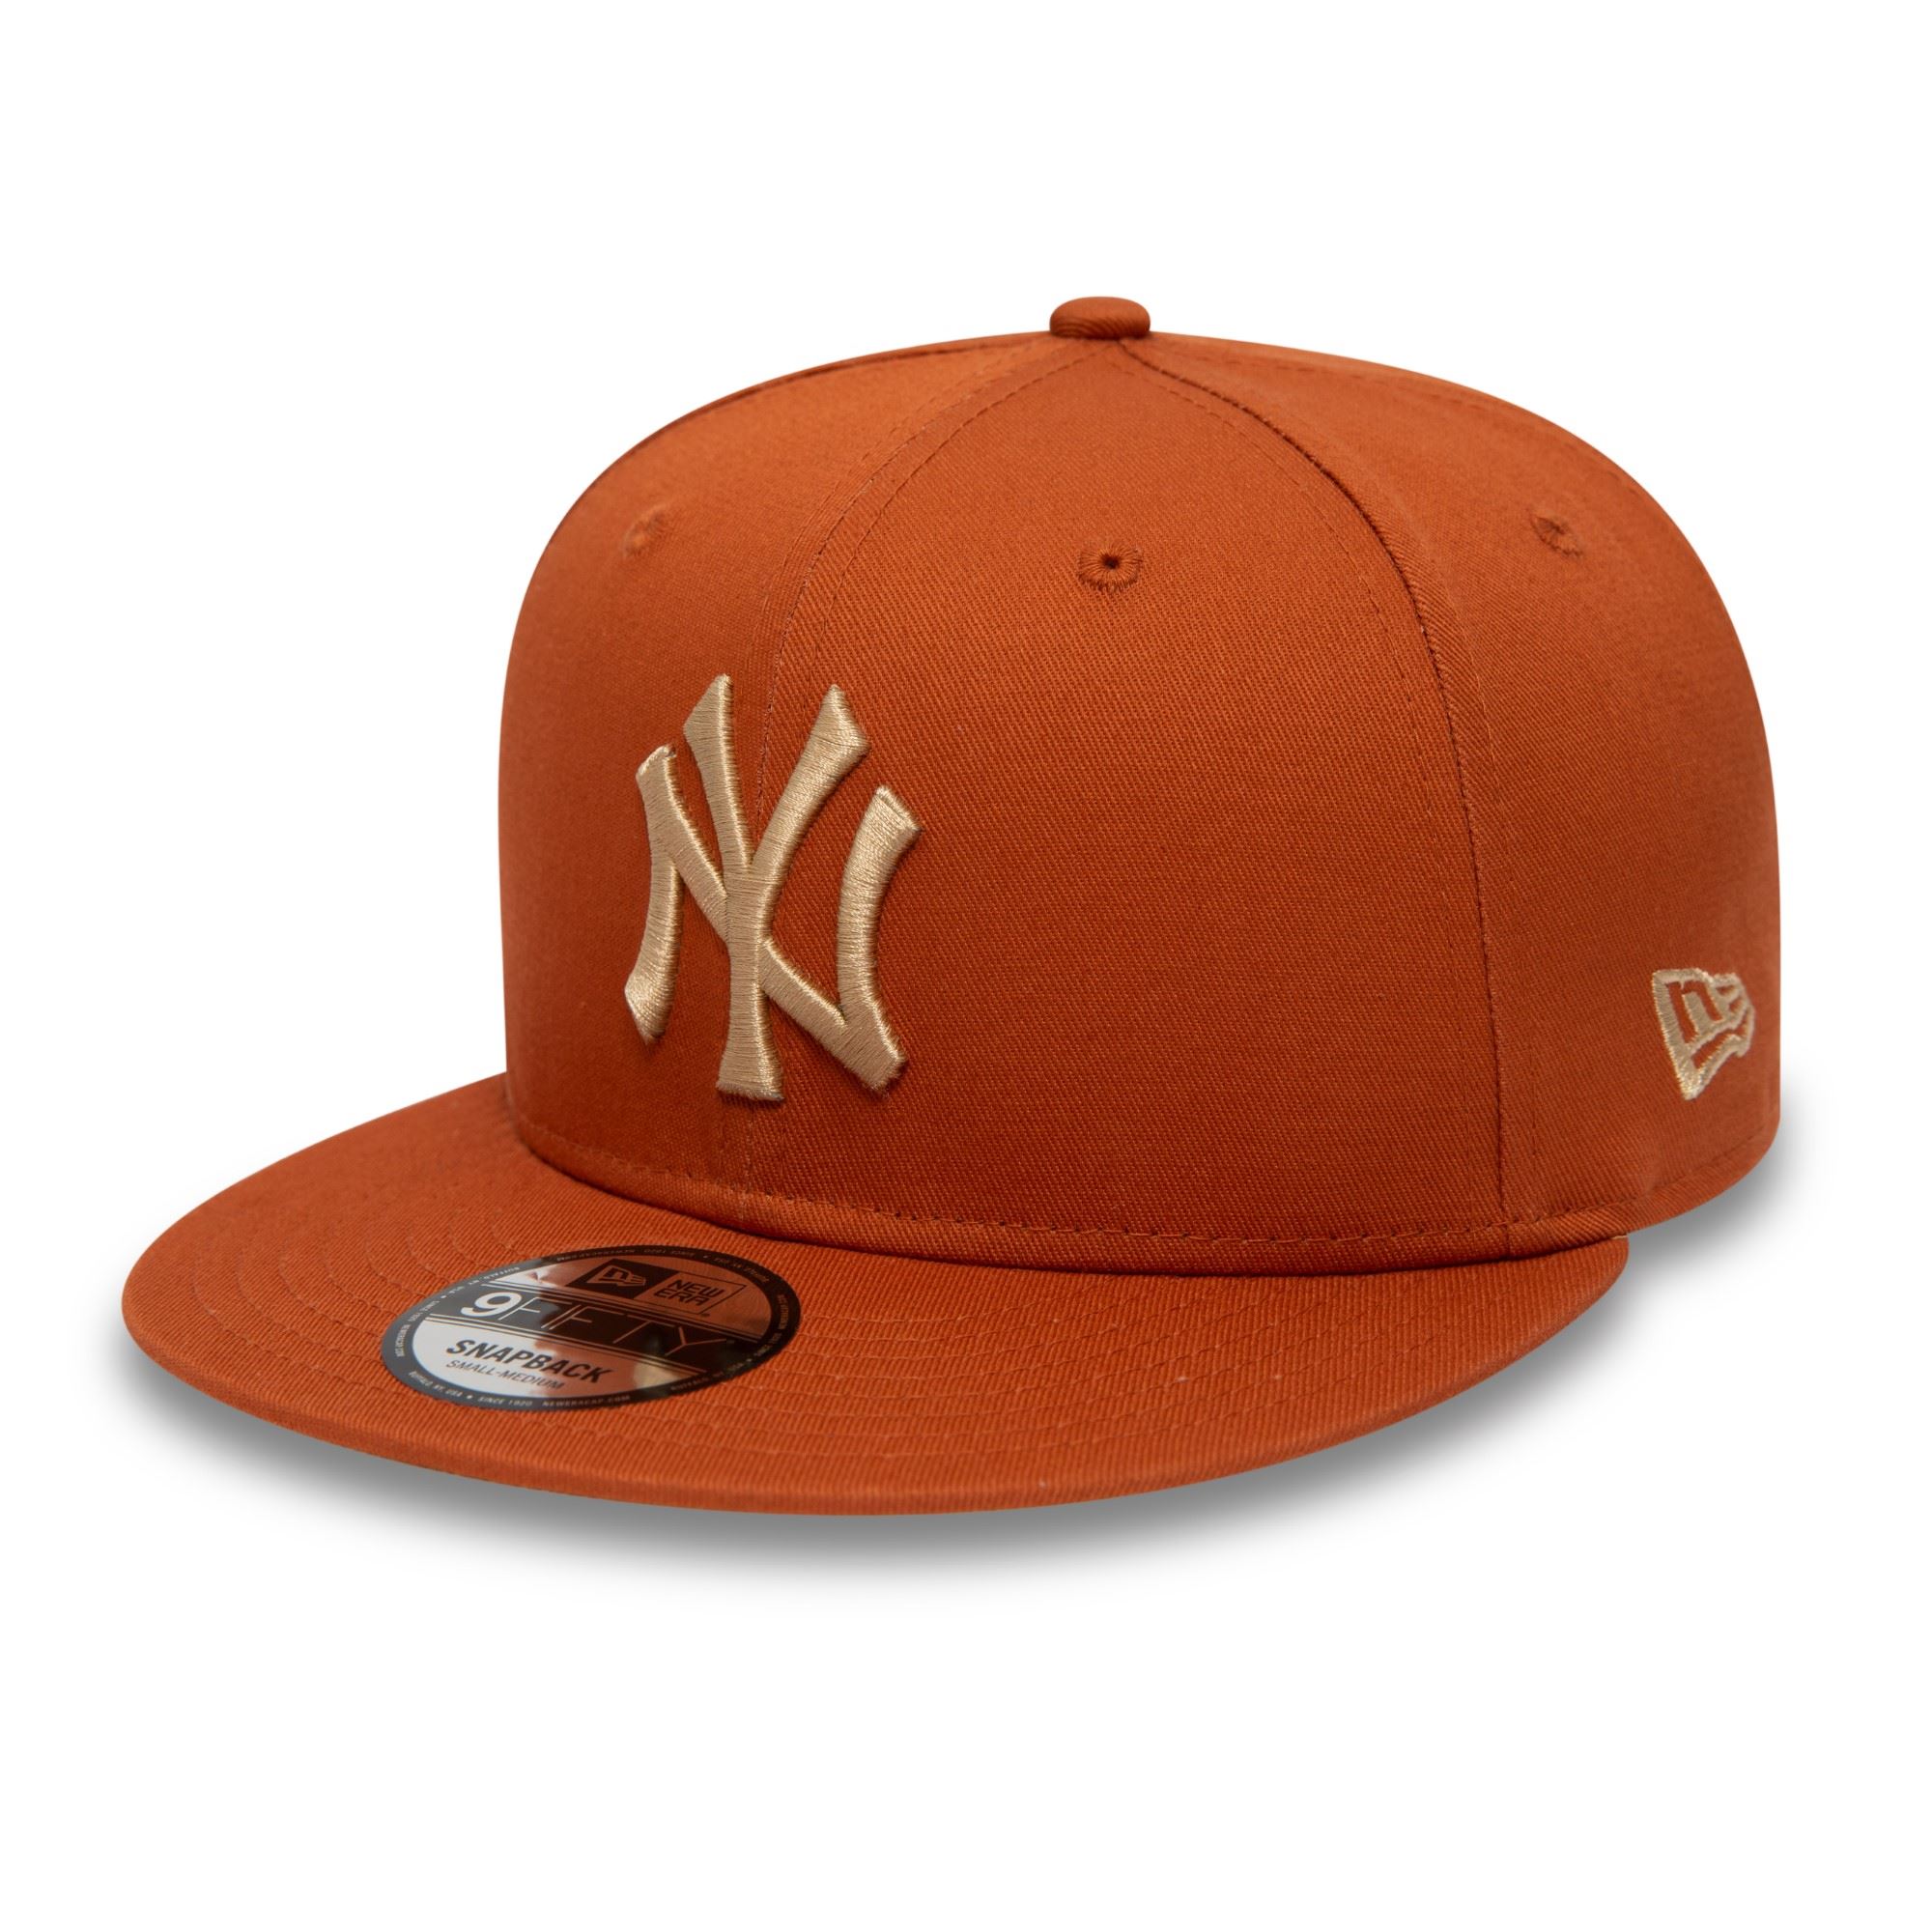 New York Yankees MLB Side Patch Brown 9Fifty Snaback Cap New Era